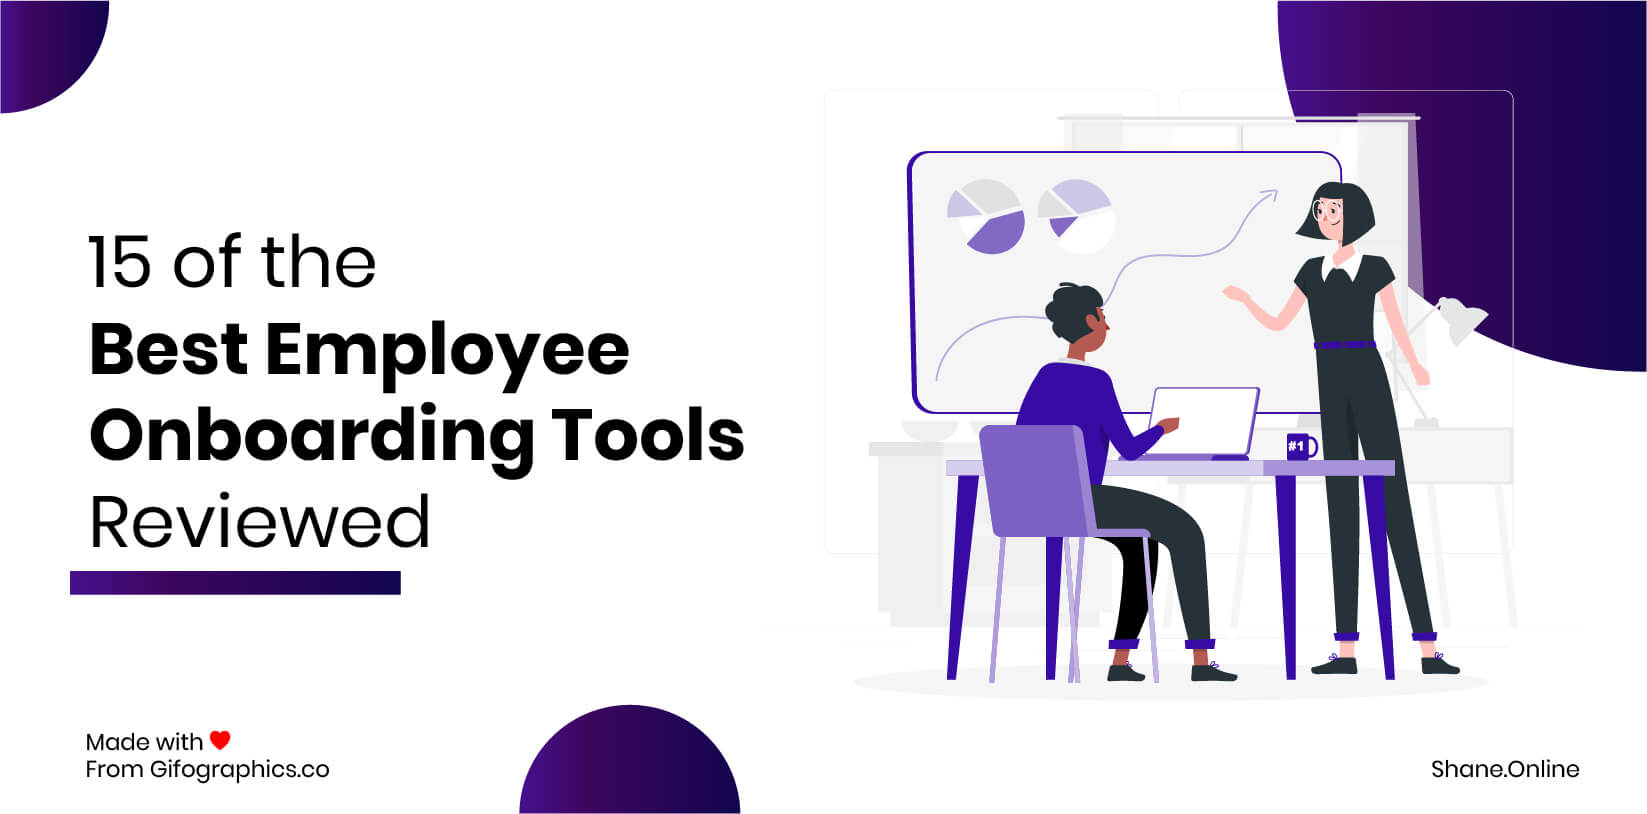 15 of the Best Employee Onboarding Tools Reviewed